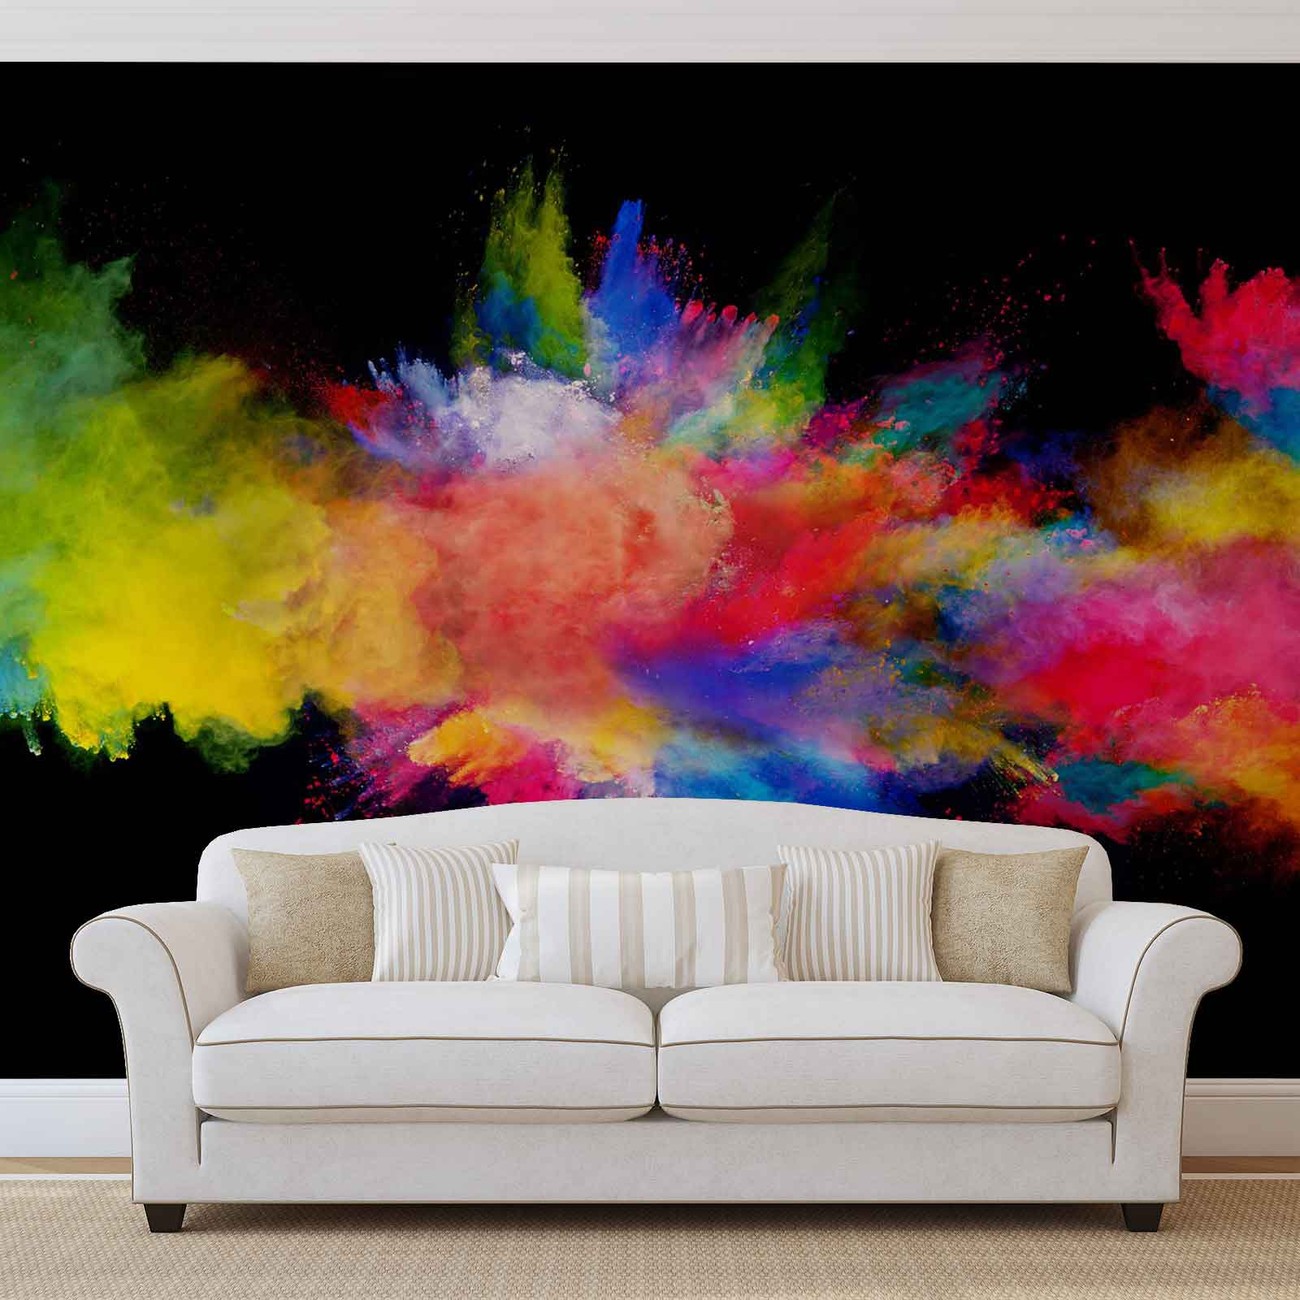 Colour Explosion Wall Paper Mural EuroPosters | Buy at